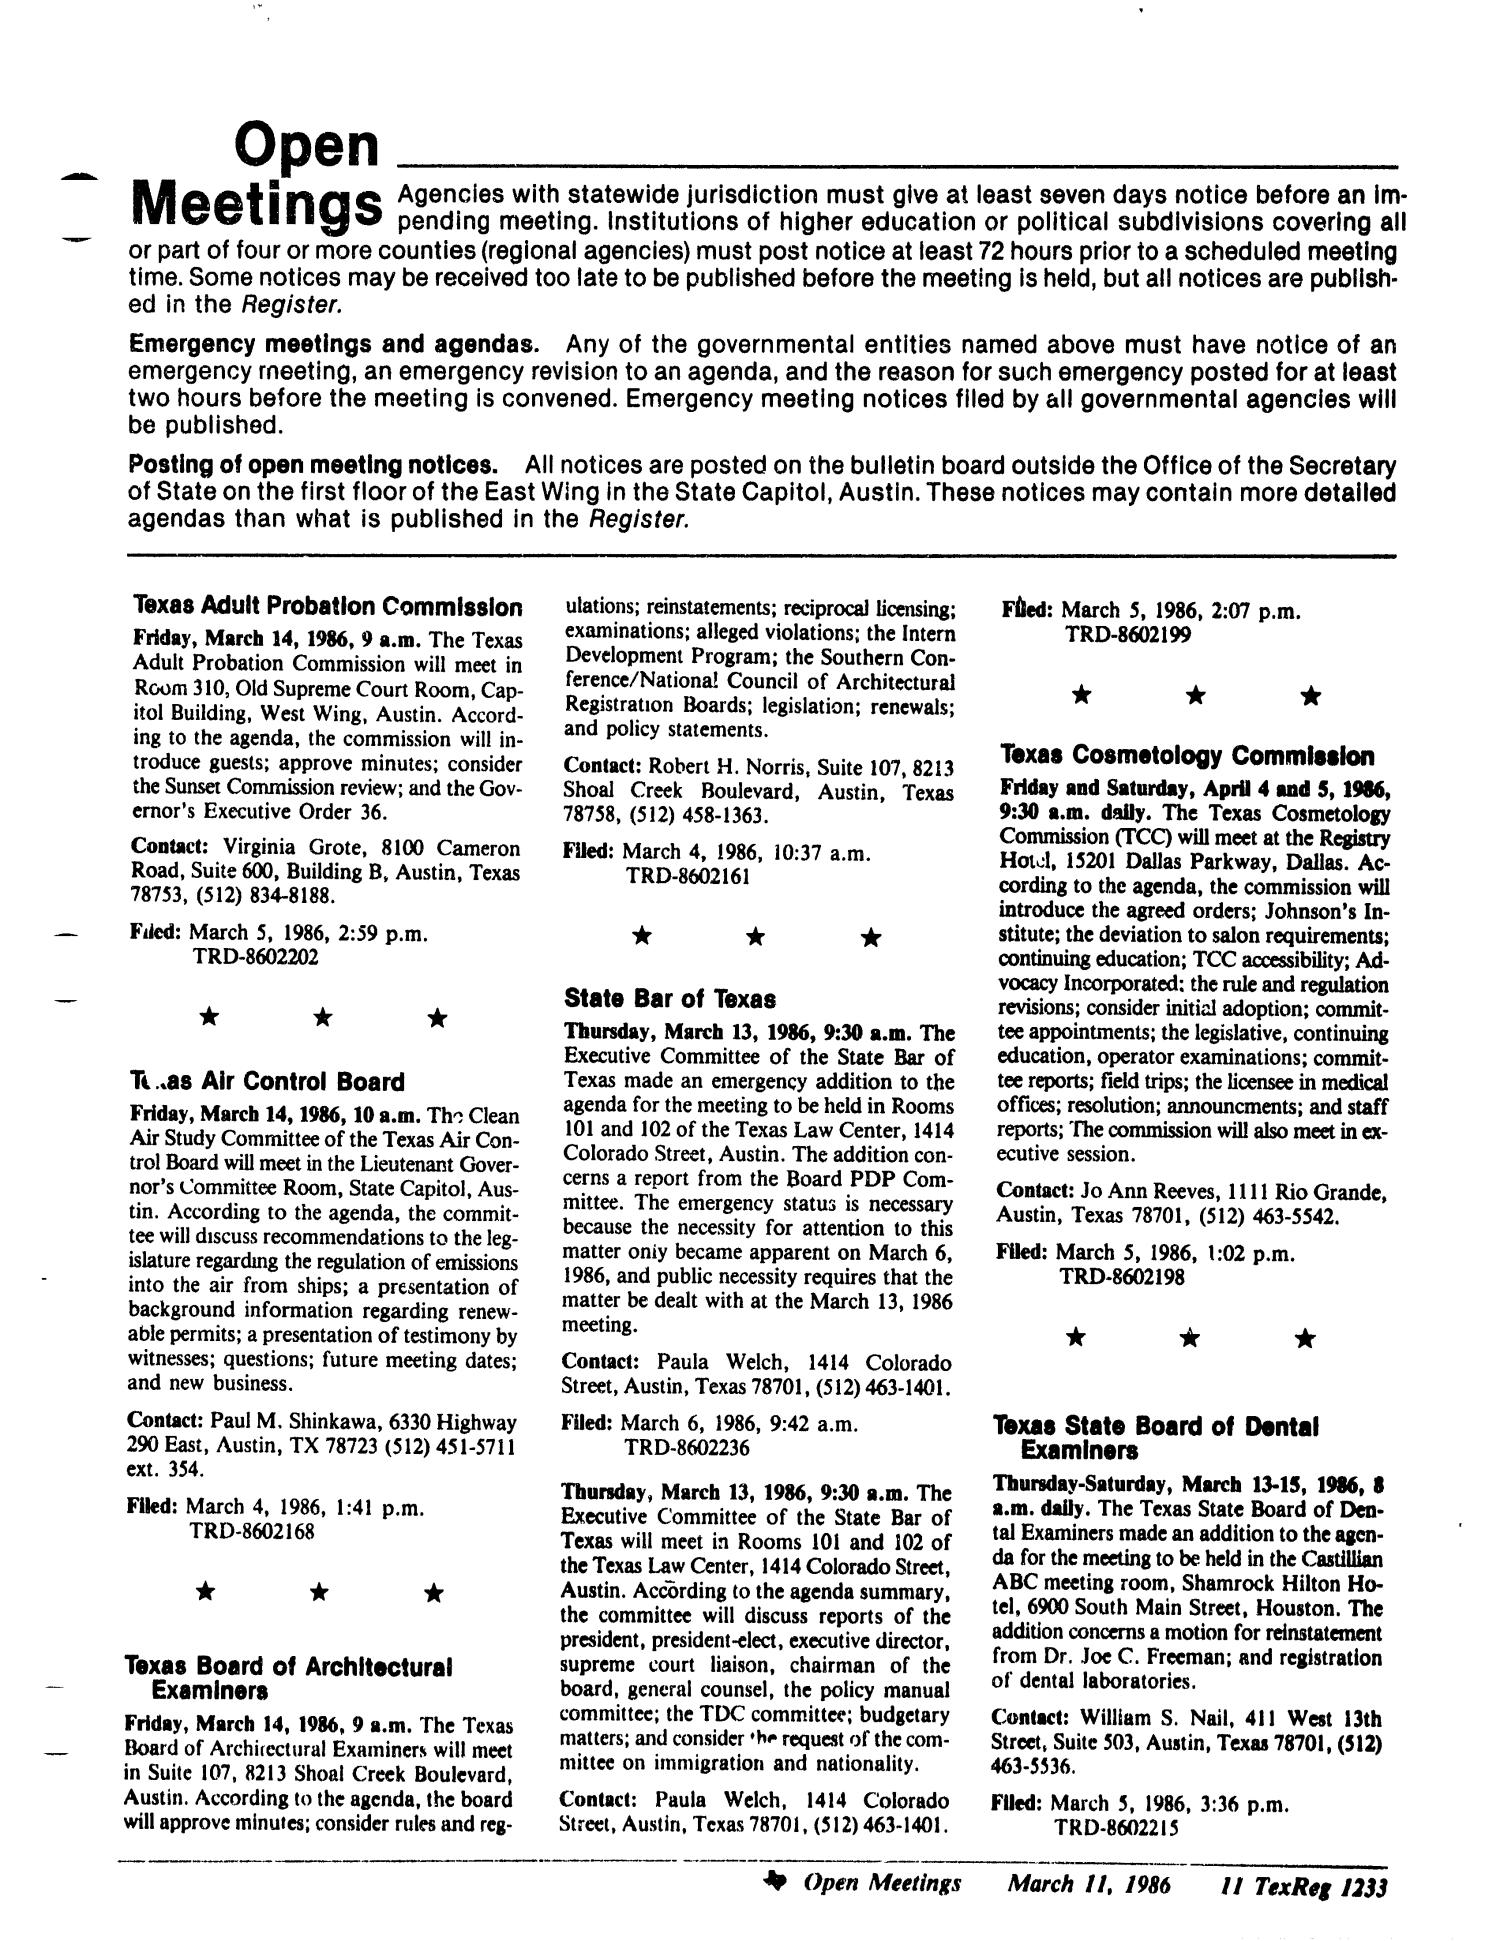 Texas Register, Volume 11, Number 19, Pages 1163-1244, March 11, 1986
                                                
                                                    1233
                                                